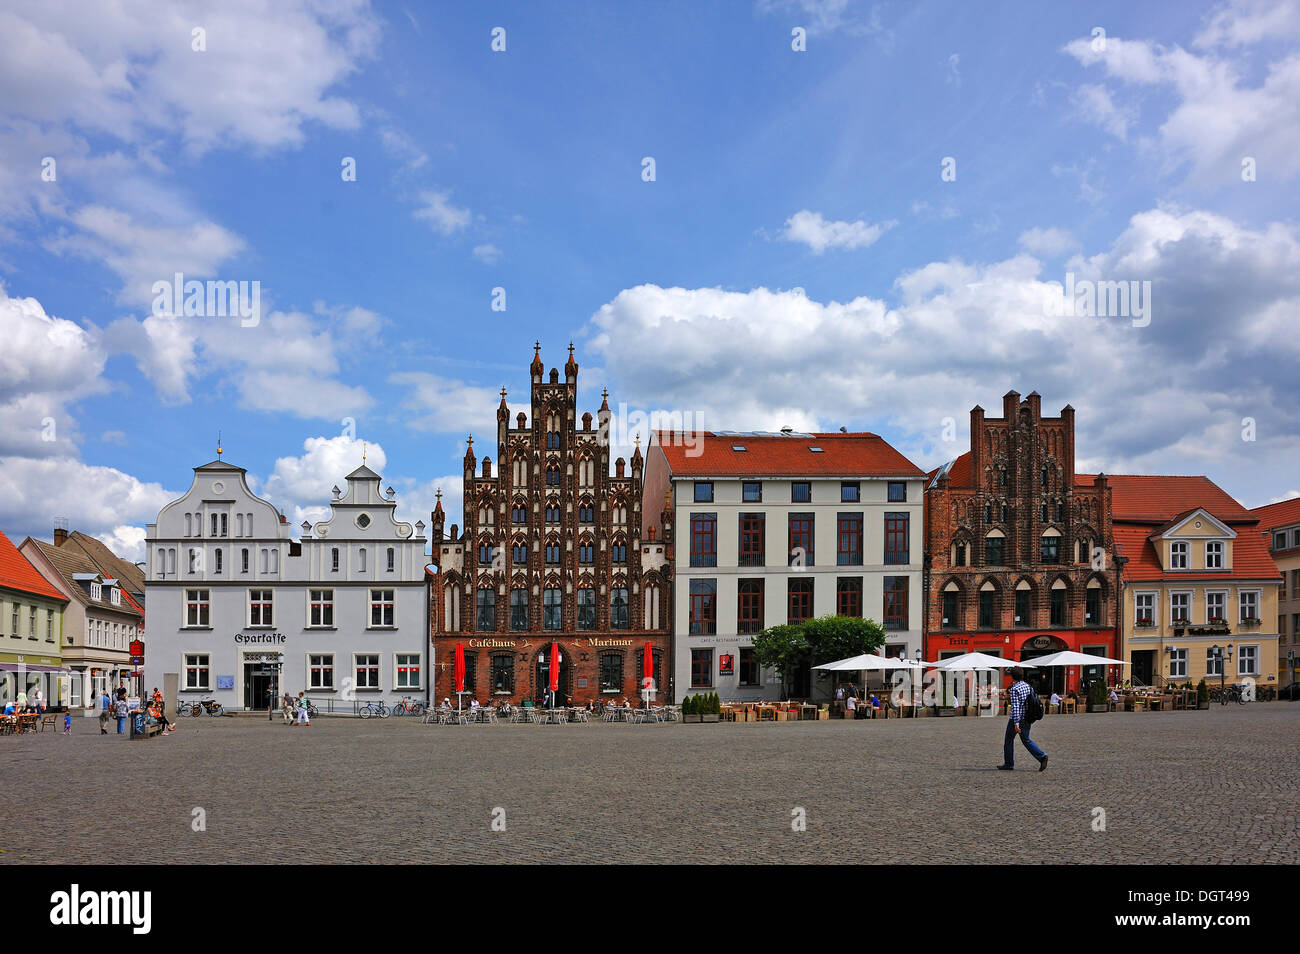 Historic gabled houses on Markt square, the second house from the left is a town house with a stepped gable, brick architecture Stock Photo